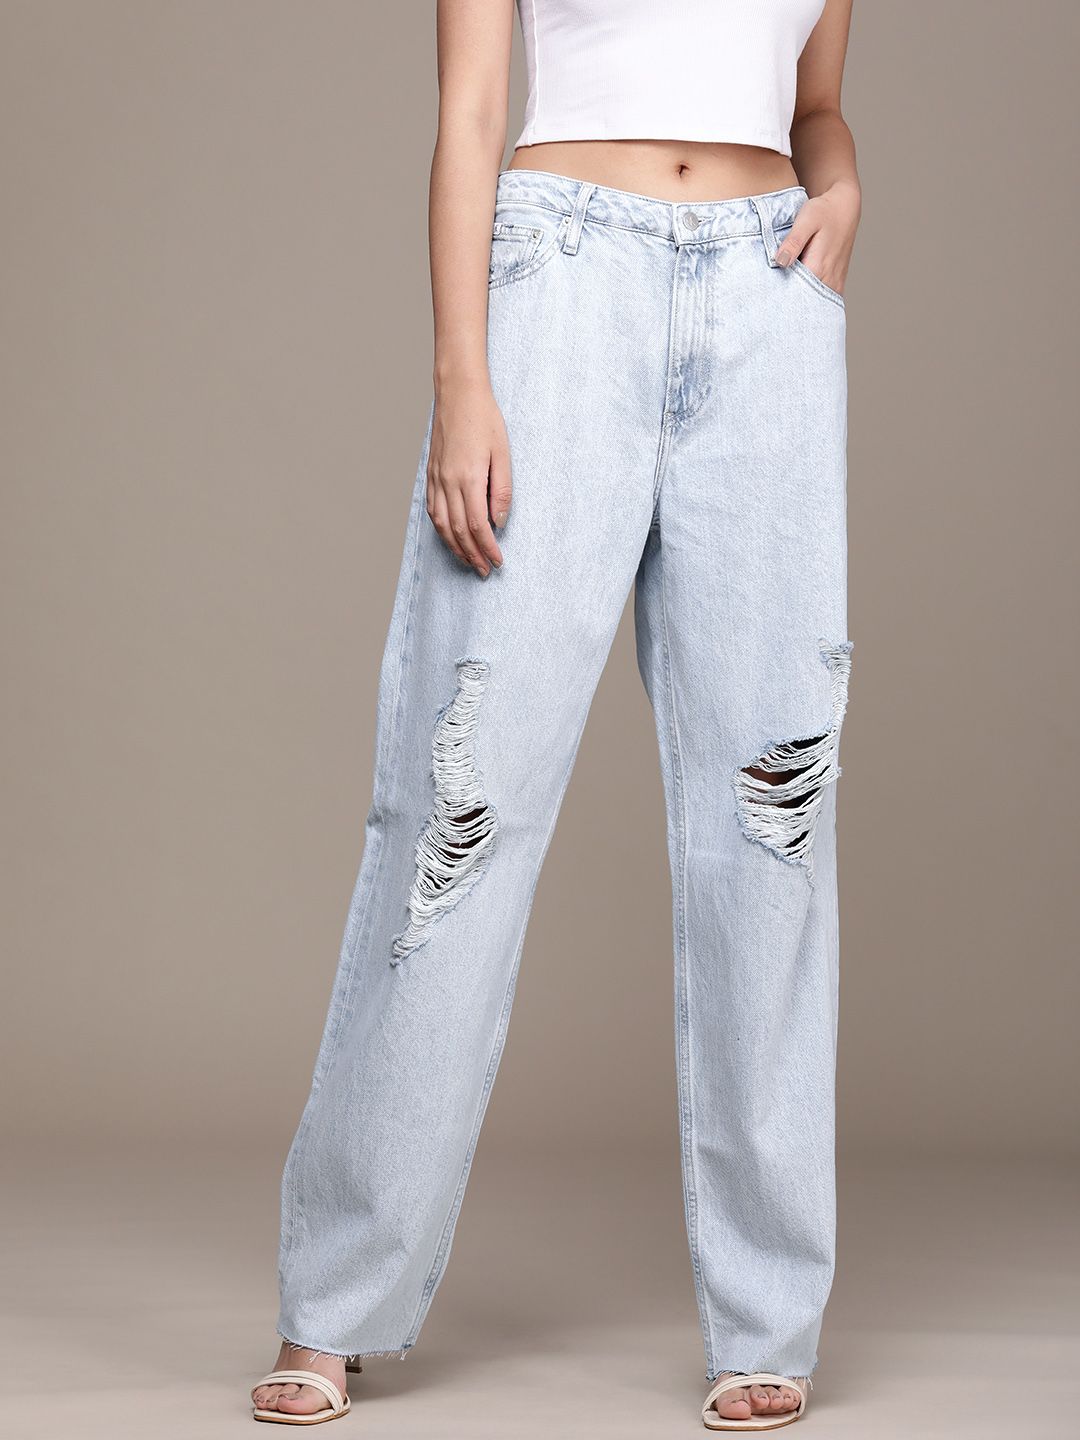 Calvin Klein Jeans Women Blue 90s Straight Fit Highly Distressed Light Fade Jeans Price in India